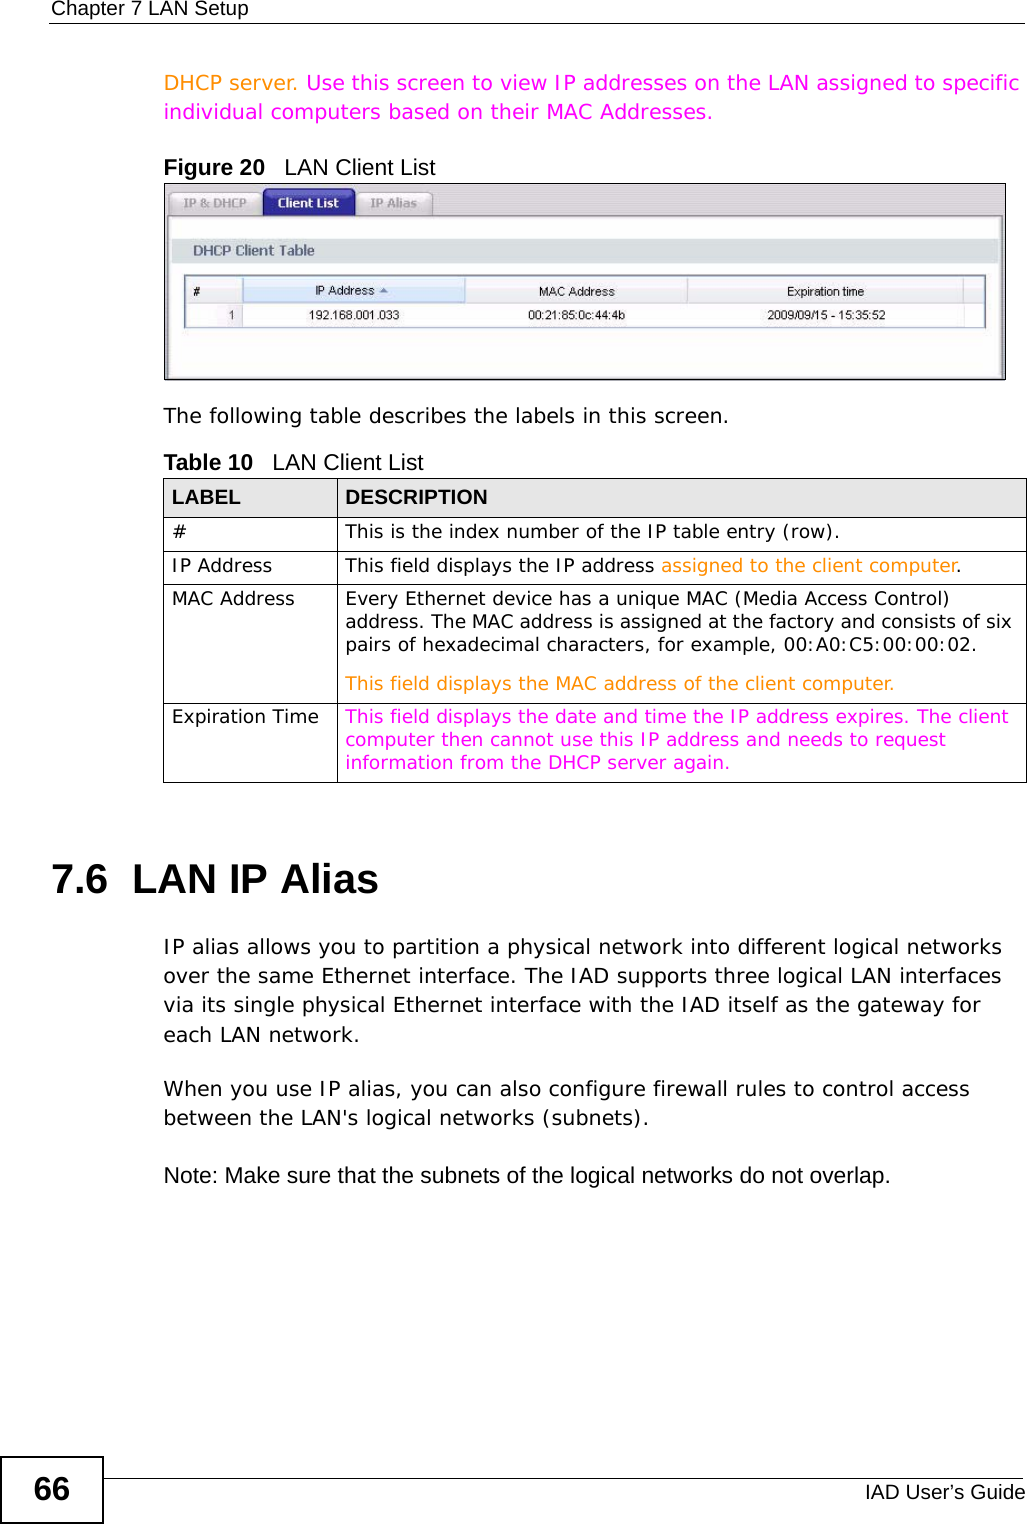 Chapter 7 LAN SetupIAD User’s Guide66DHCP server. Use this screen to view IP addresses on the LAN assigned to specific individual computers based on their MAC Addresses. Figure 20   LAN Client ListThe following table describes the labels in this screen.7.6  LAN IP AliasIP alias allows you to partition a physical network into different logical networks over the same Ethernet interface. The IAD supports three logical LAN interfaces via its single physical Ethernet interface with the IAD itself as the gateway for each LAN network.When you use IP alias, you can also configure firewall rules to control access between the LAN&apos;s logical networks (subnets).Note: Make sure that the subnets of the logical networks do not overlap.Table 10   LAN Client List LABEL DESCRIPTION# This is the index number of the IP table entry (row).IP Address This field displays the IP address assigned to the client computer.MAC Address Every Ethernet device has a unique MAC (Media Access Control) address. The MAC address is assigned at the factory and consists of six pairs of hexadecimal characters, for example, 00:A0:C5:00:00:02.This field displays the MAC address of the client computer.Expiration Time This field displays the date and time the IP address expires. The client computer then cannot use this IP address and needs to request information from the DHCP server again.